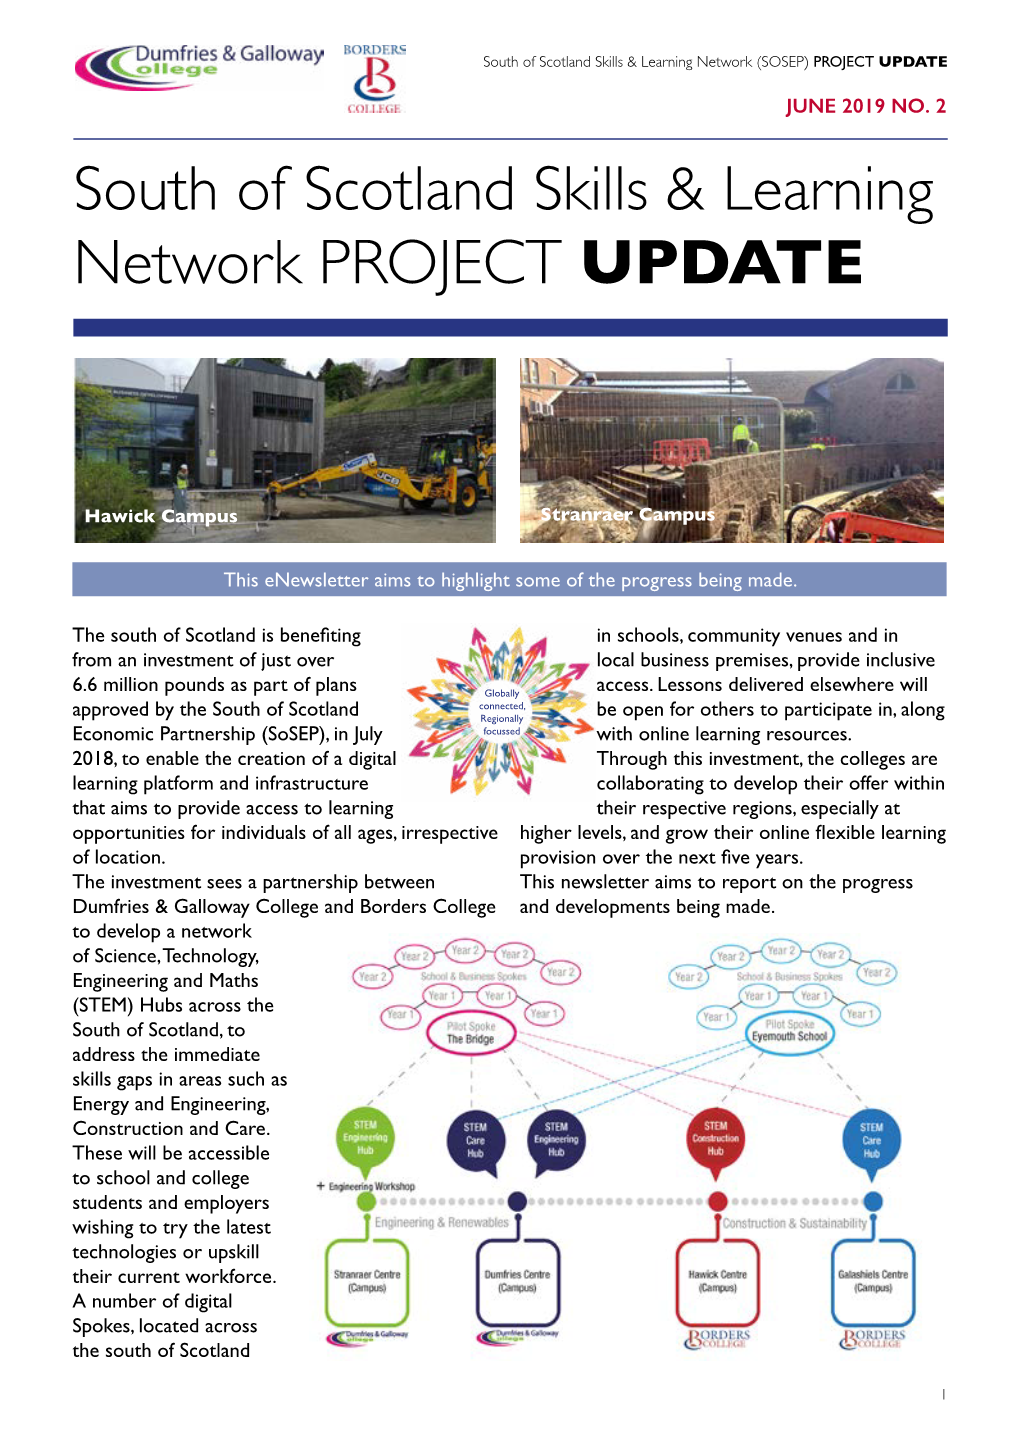 South of Scotland Skills & Learning Network PROJECT UPDATE